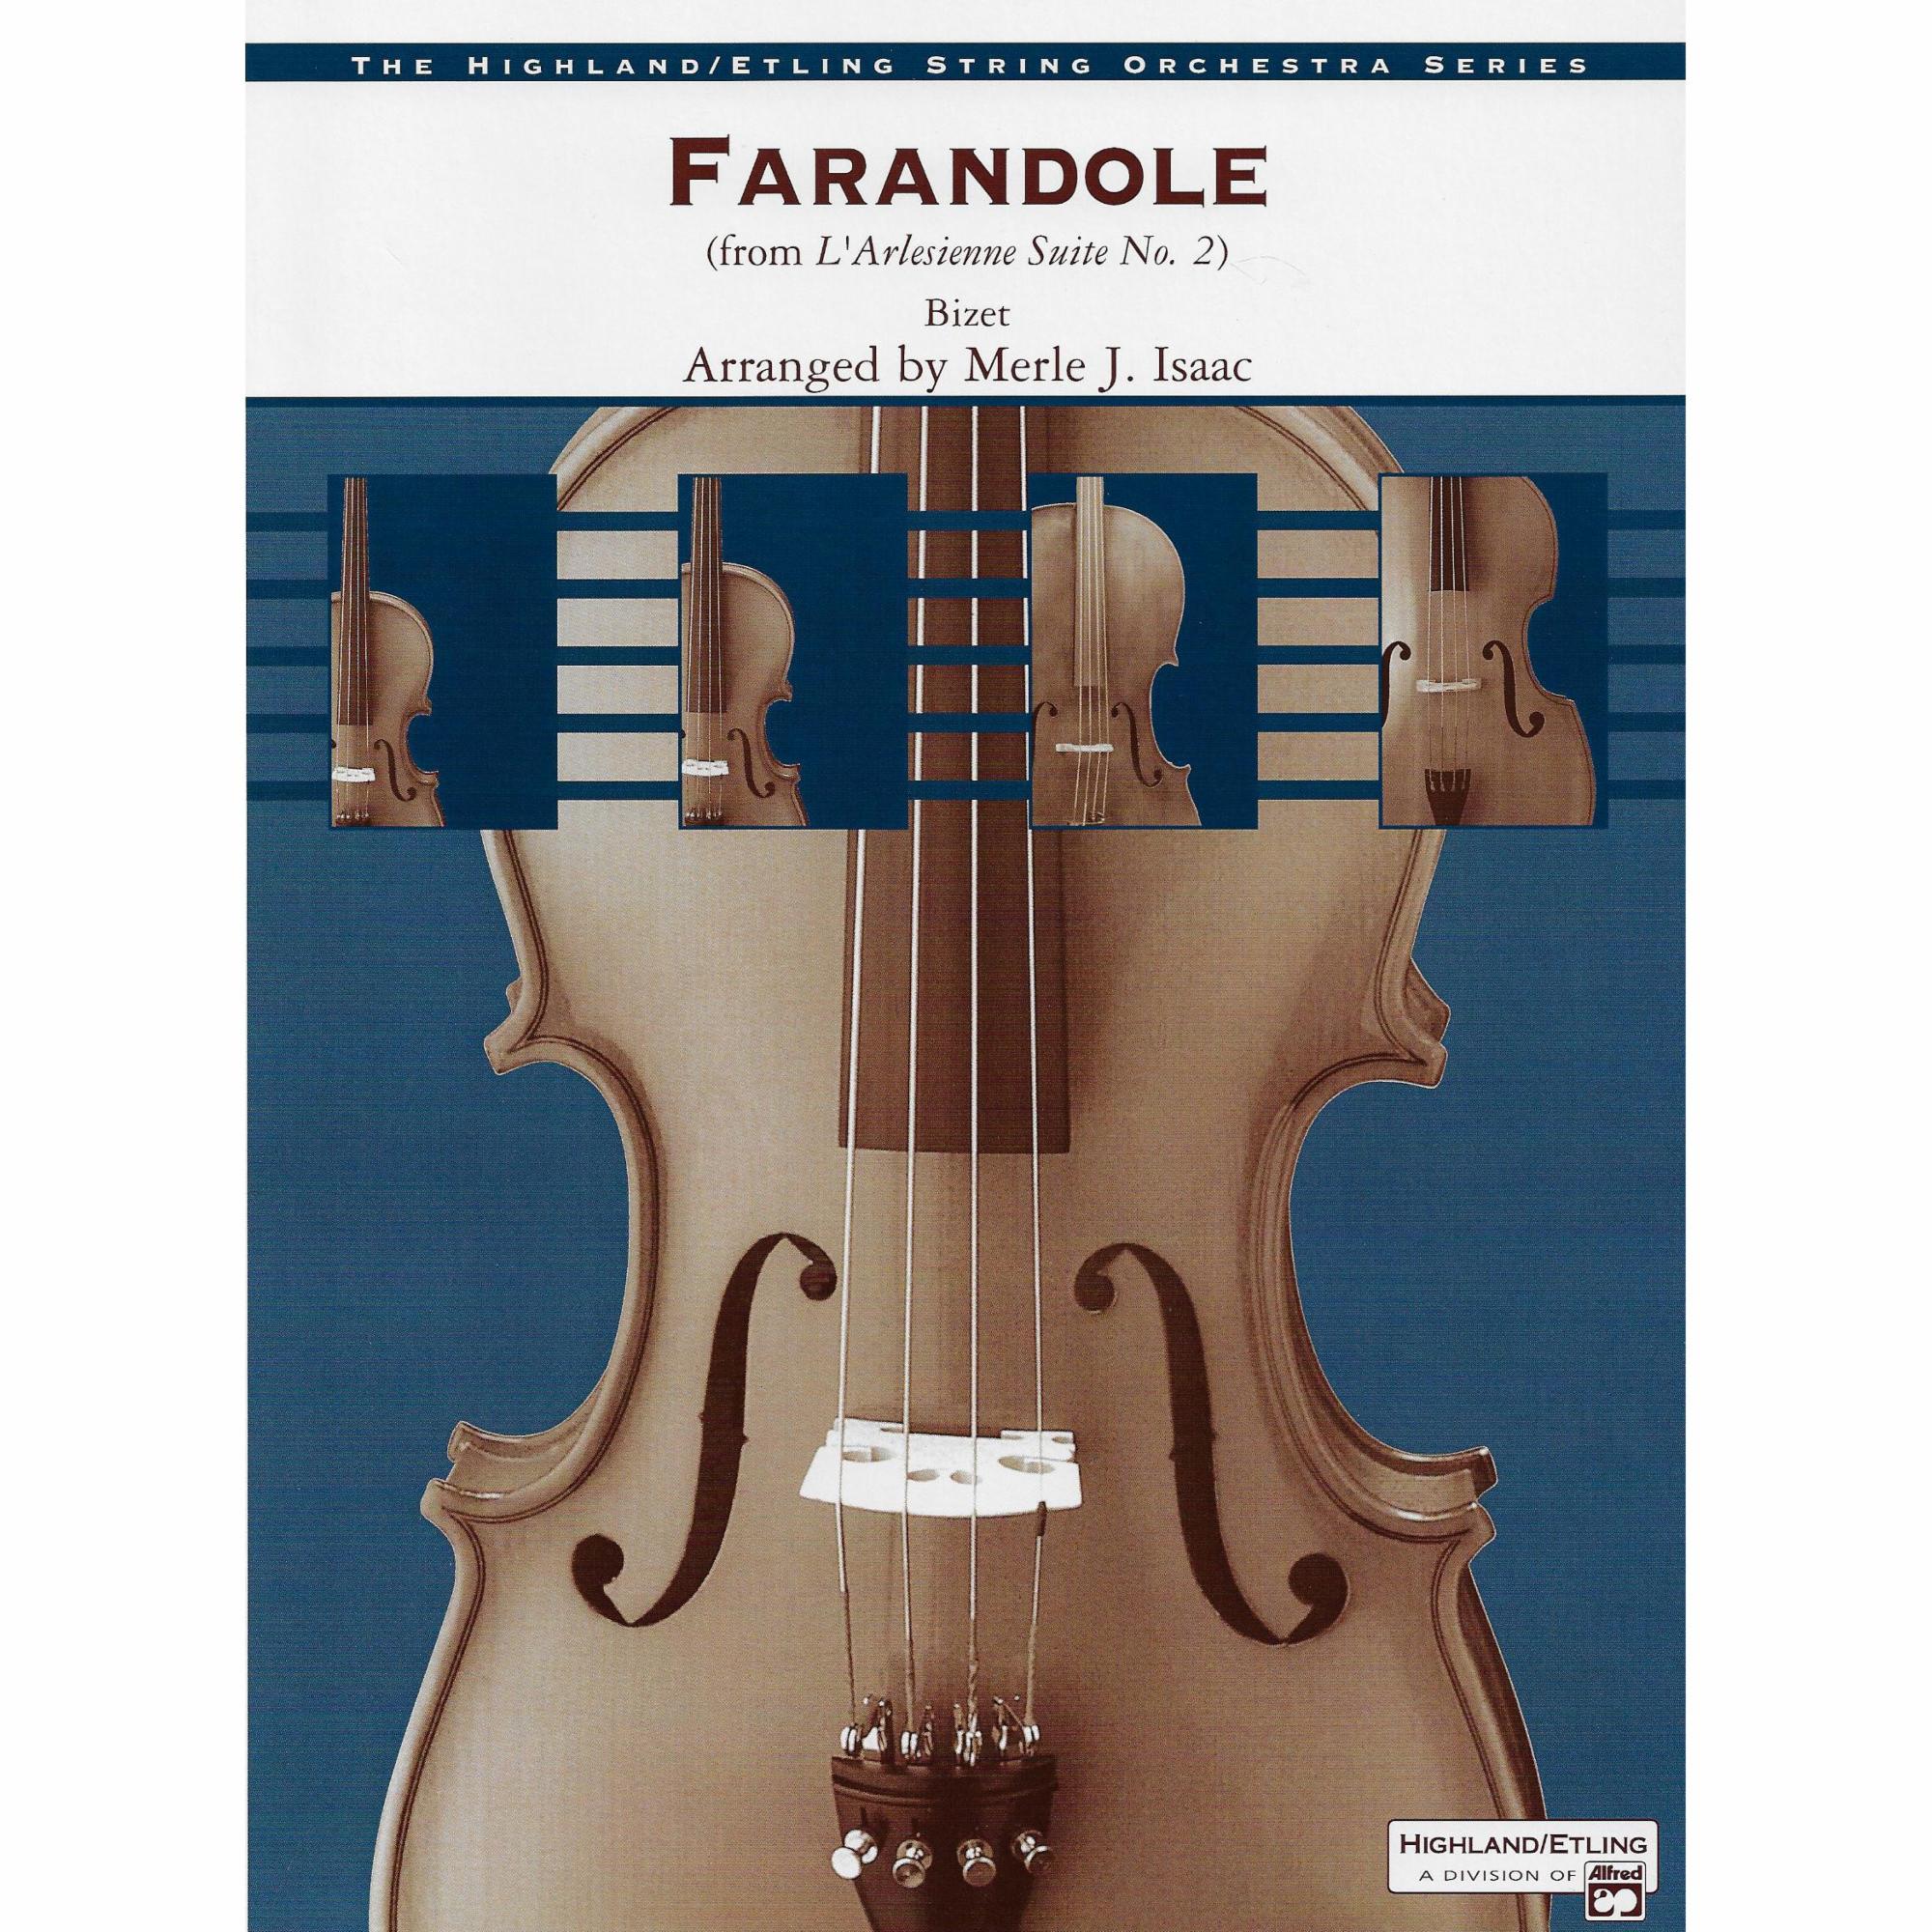 Farandole, from L'Arlesienne Suite No. 2 for String Orchestra